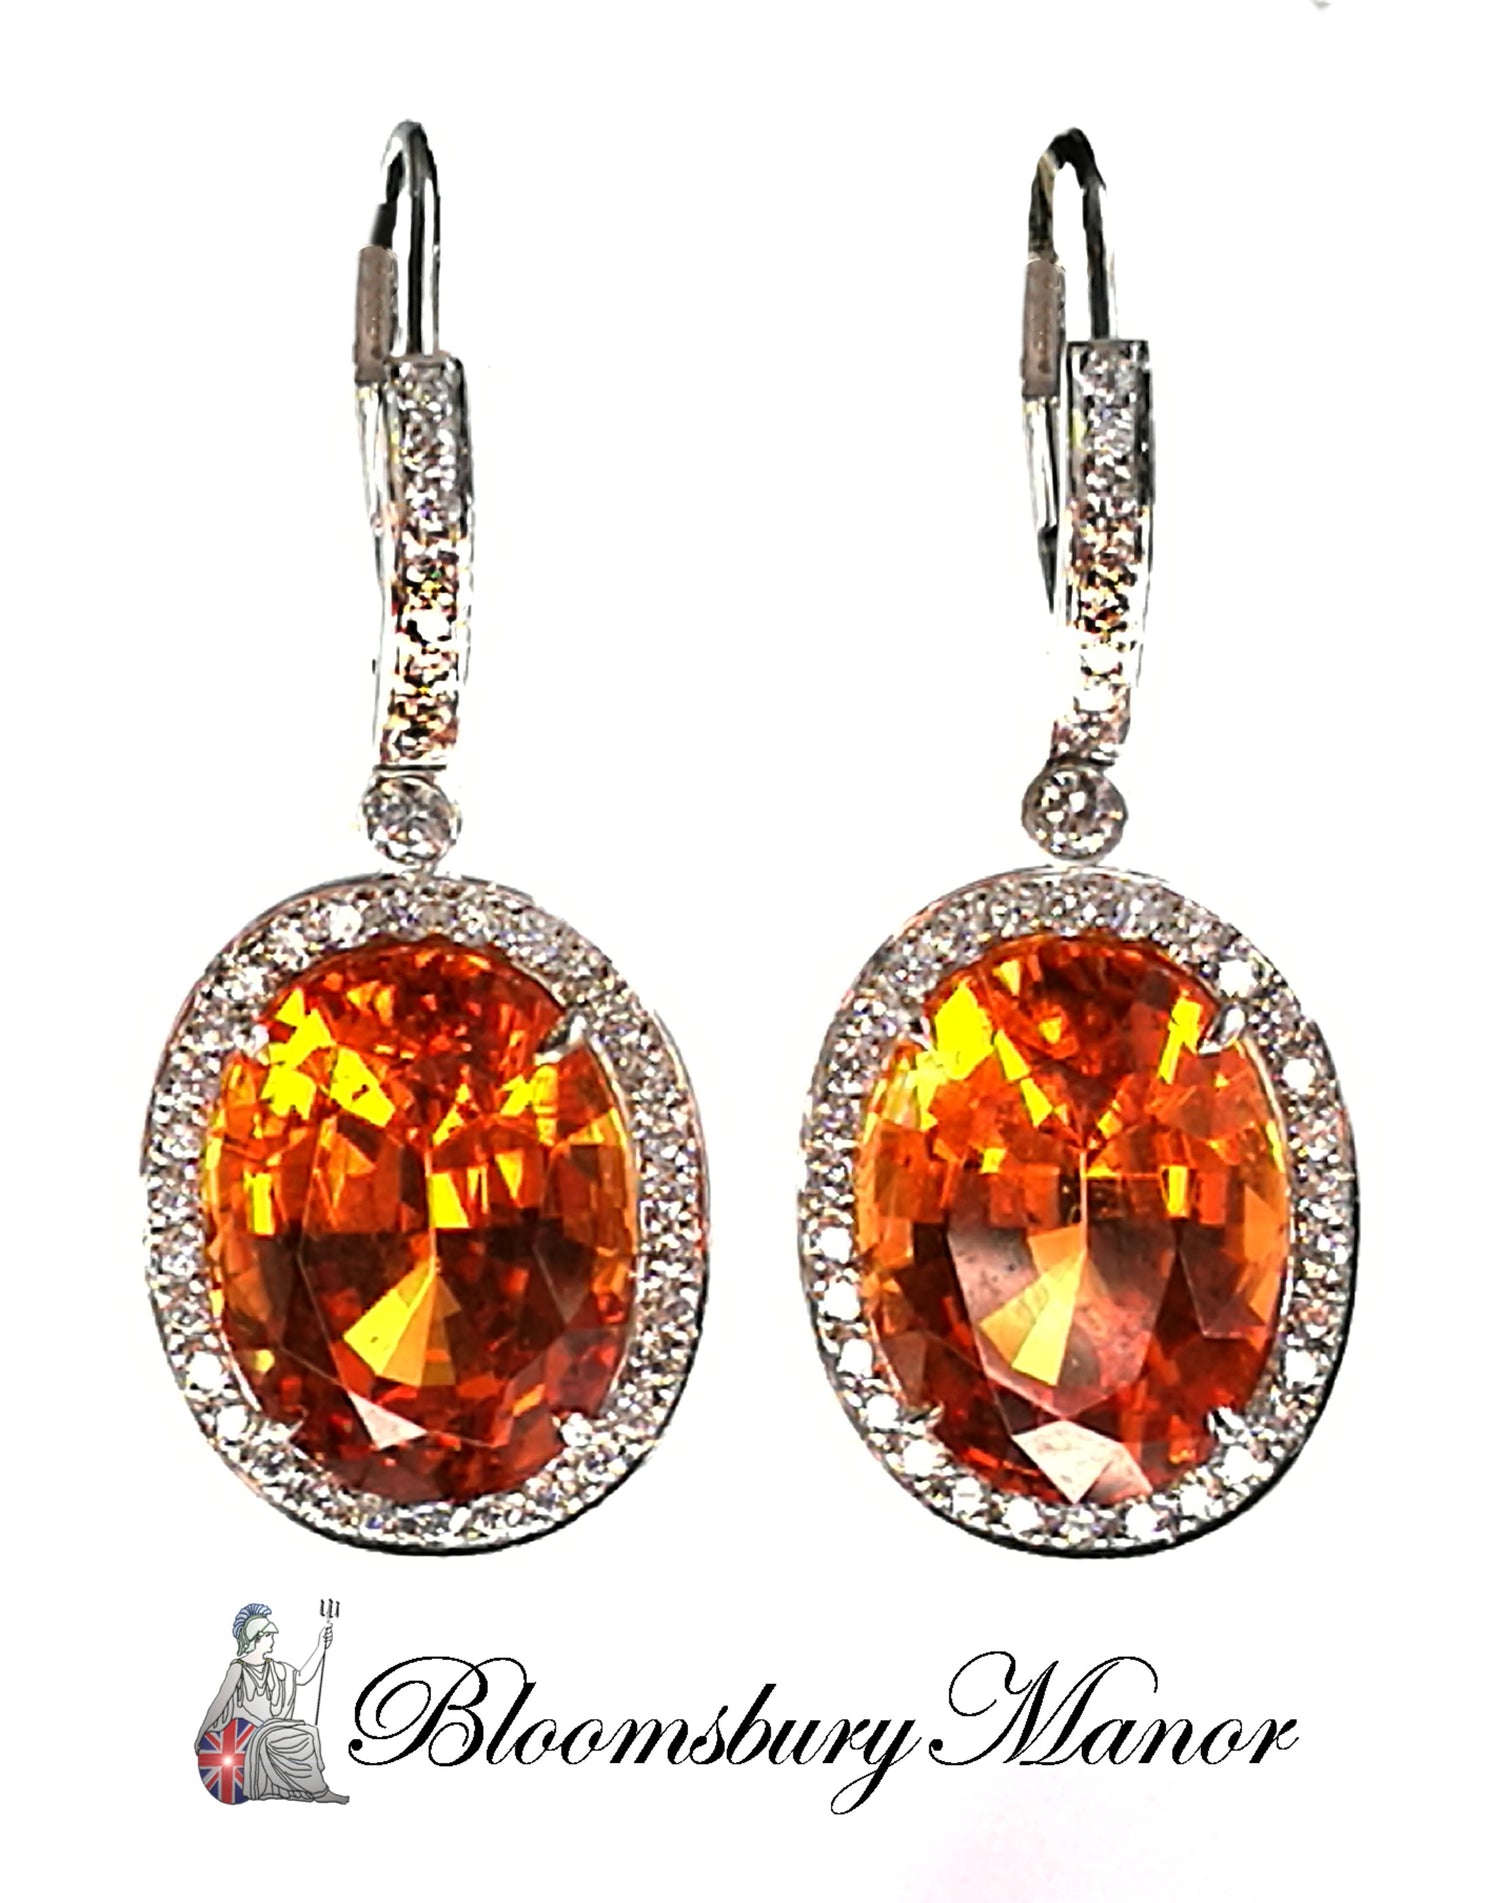 The Most Valuable Tiffany & Co Gemstone Earrings In The World!